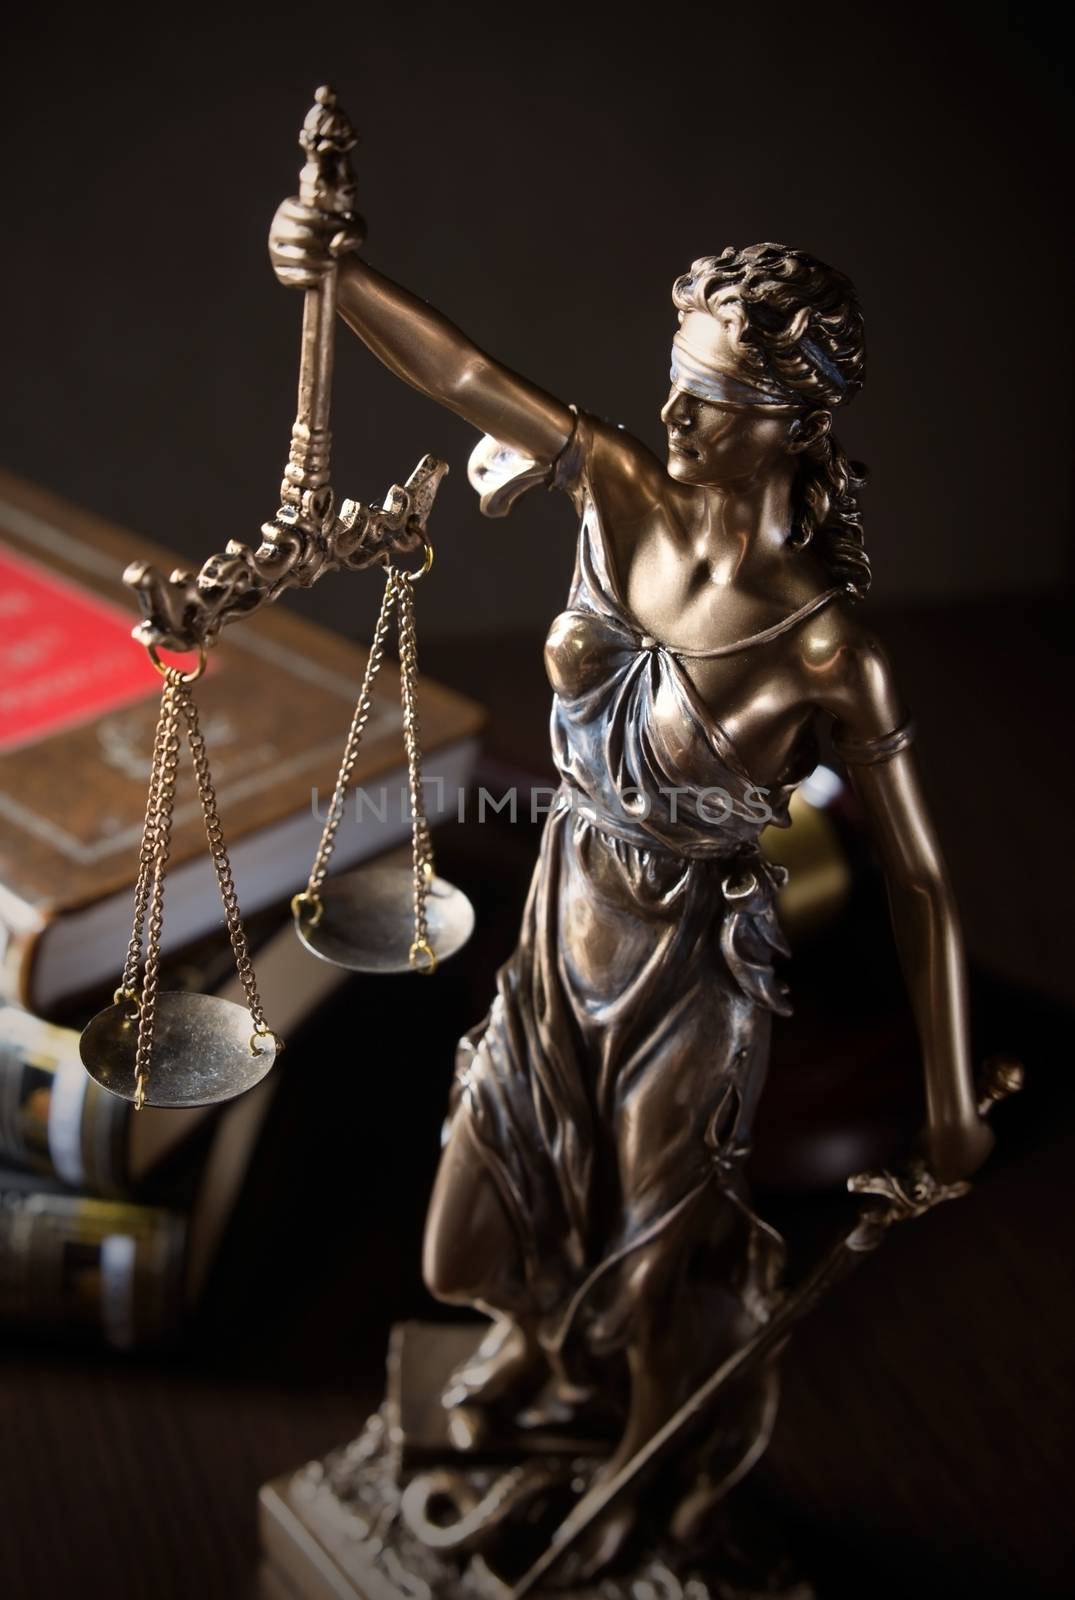 Law concept with Themis and books in background by simpson33